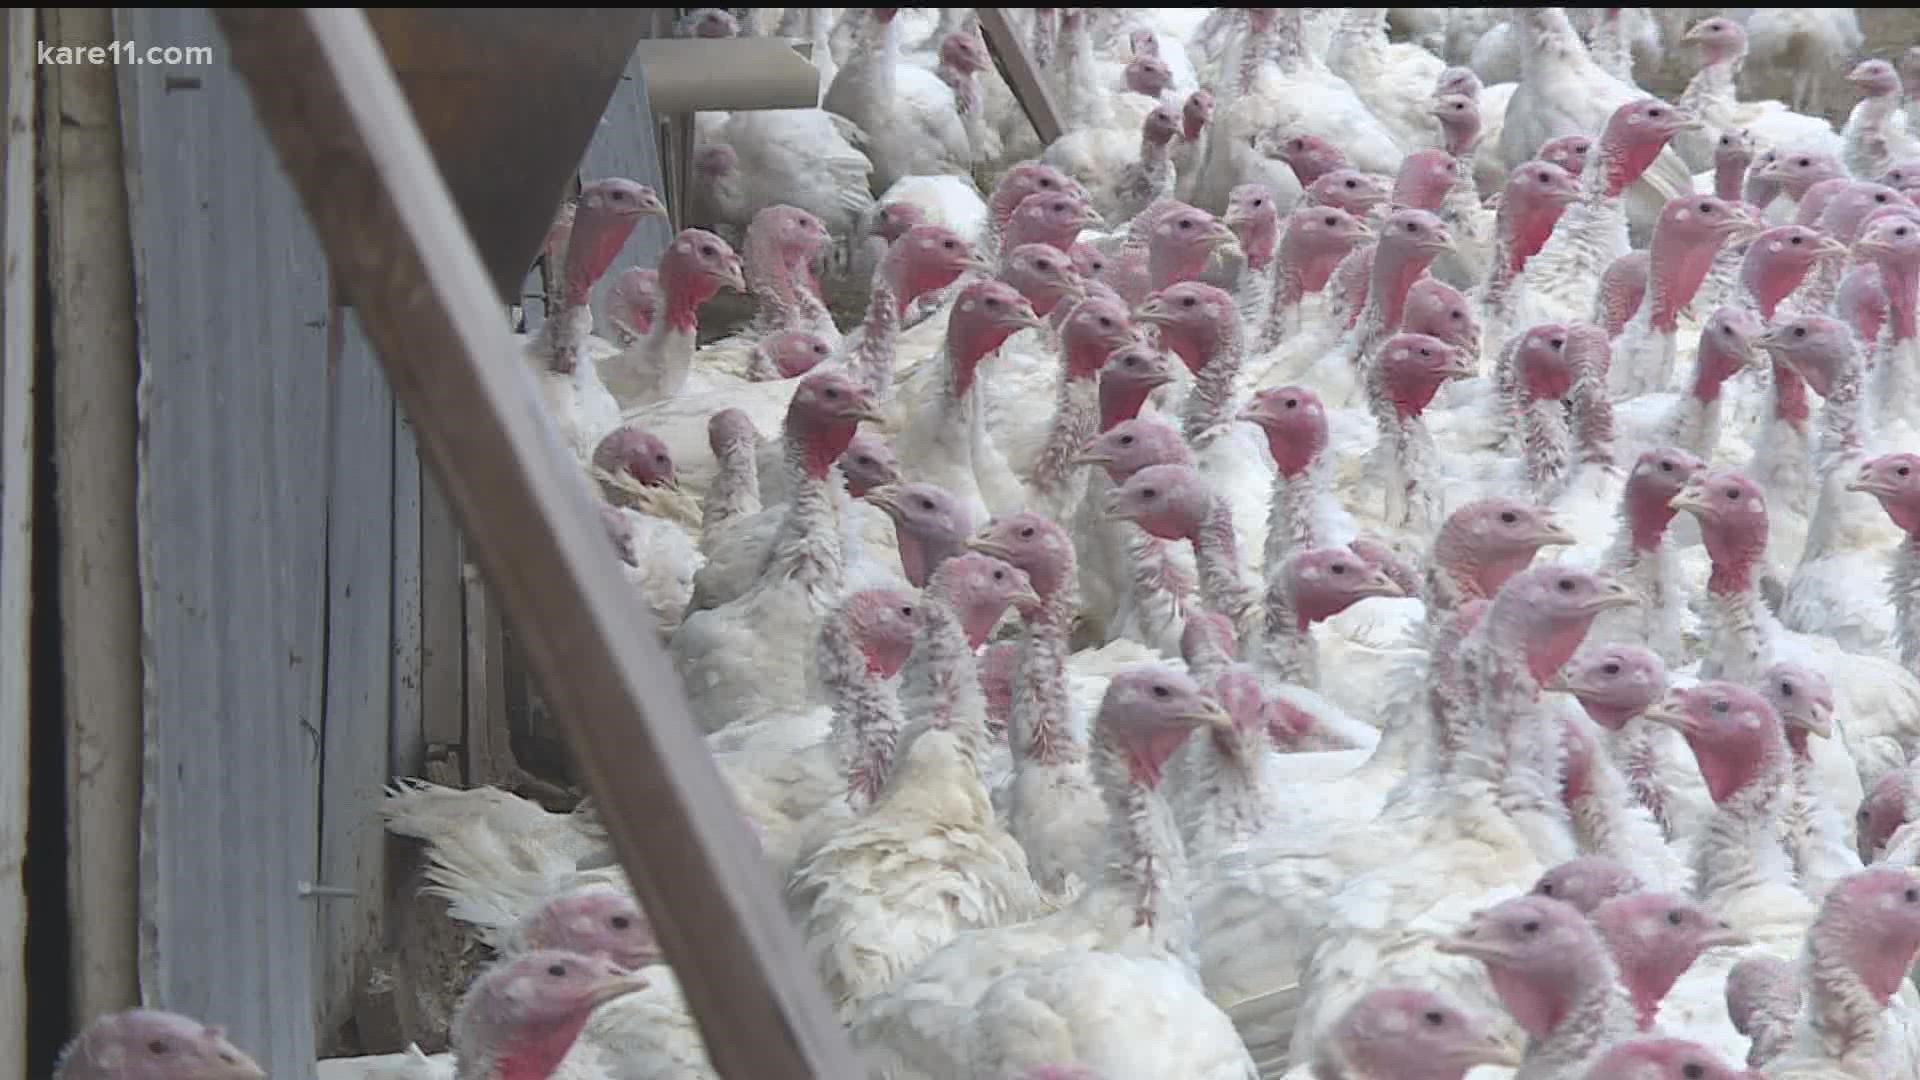 State officials say the first two cases of Highly Pathogenic Avian Influenza in Minnesota were reported in two poultry flocks.